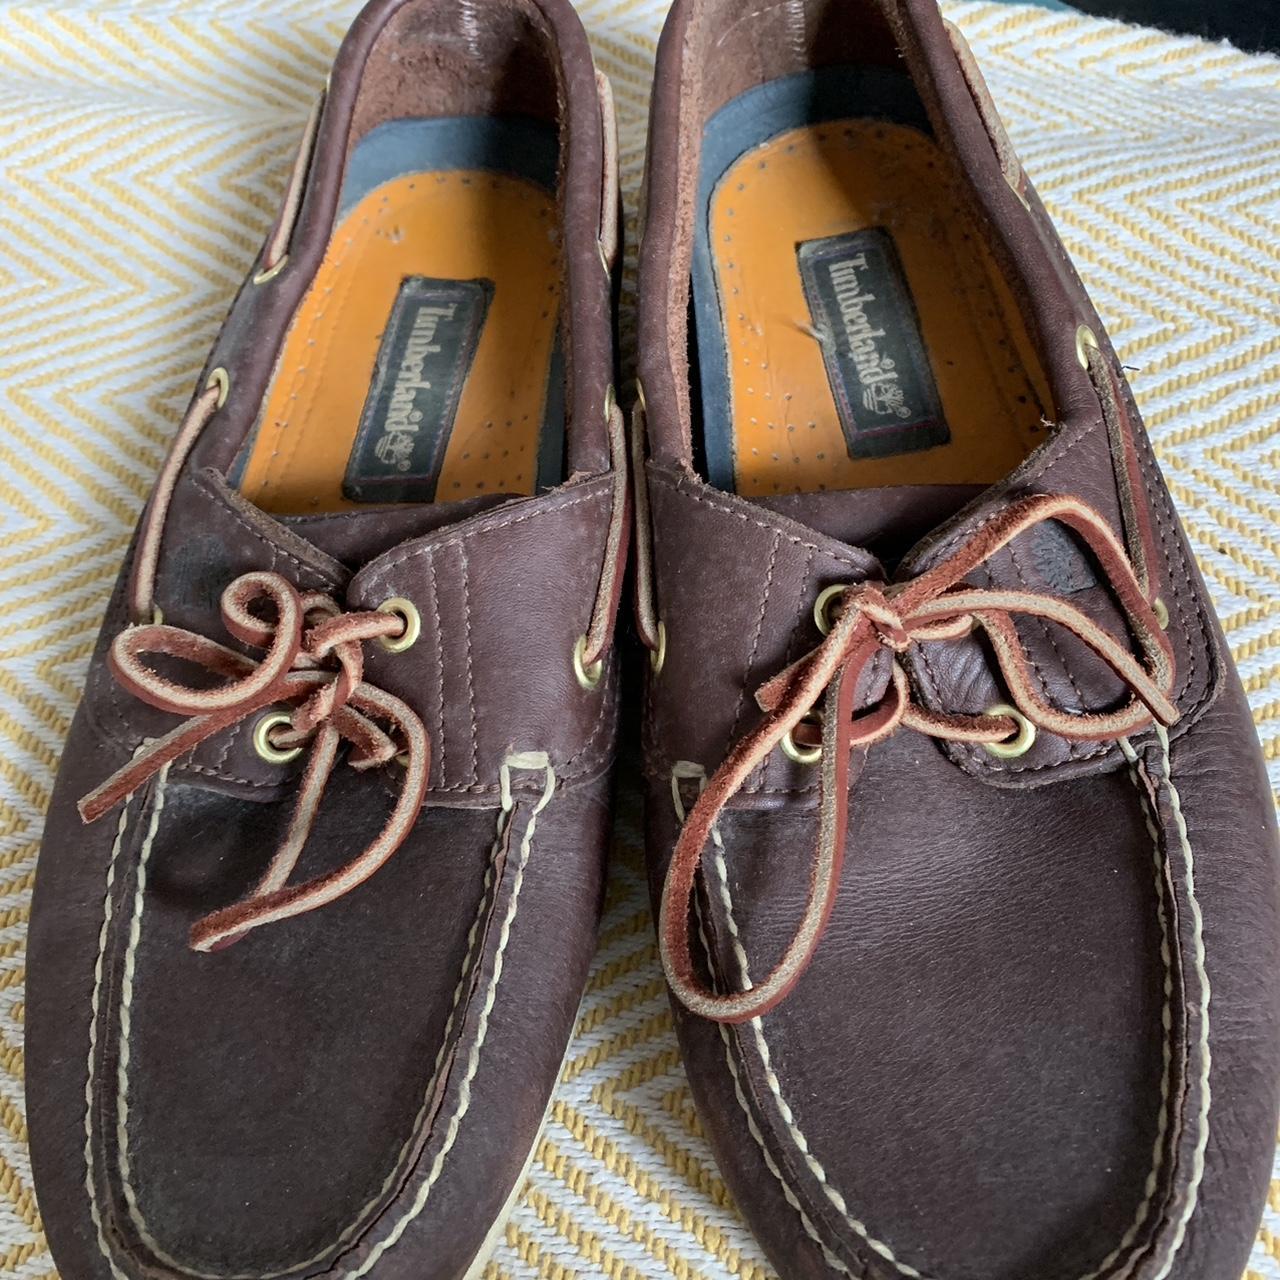 Timberland boat shoes - Depop